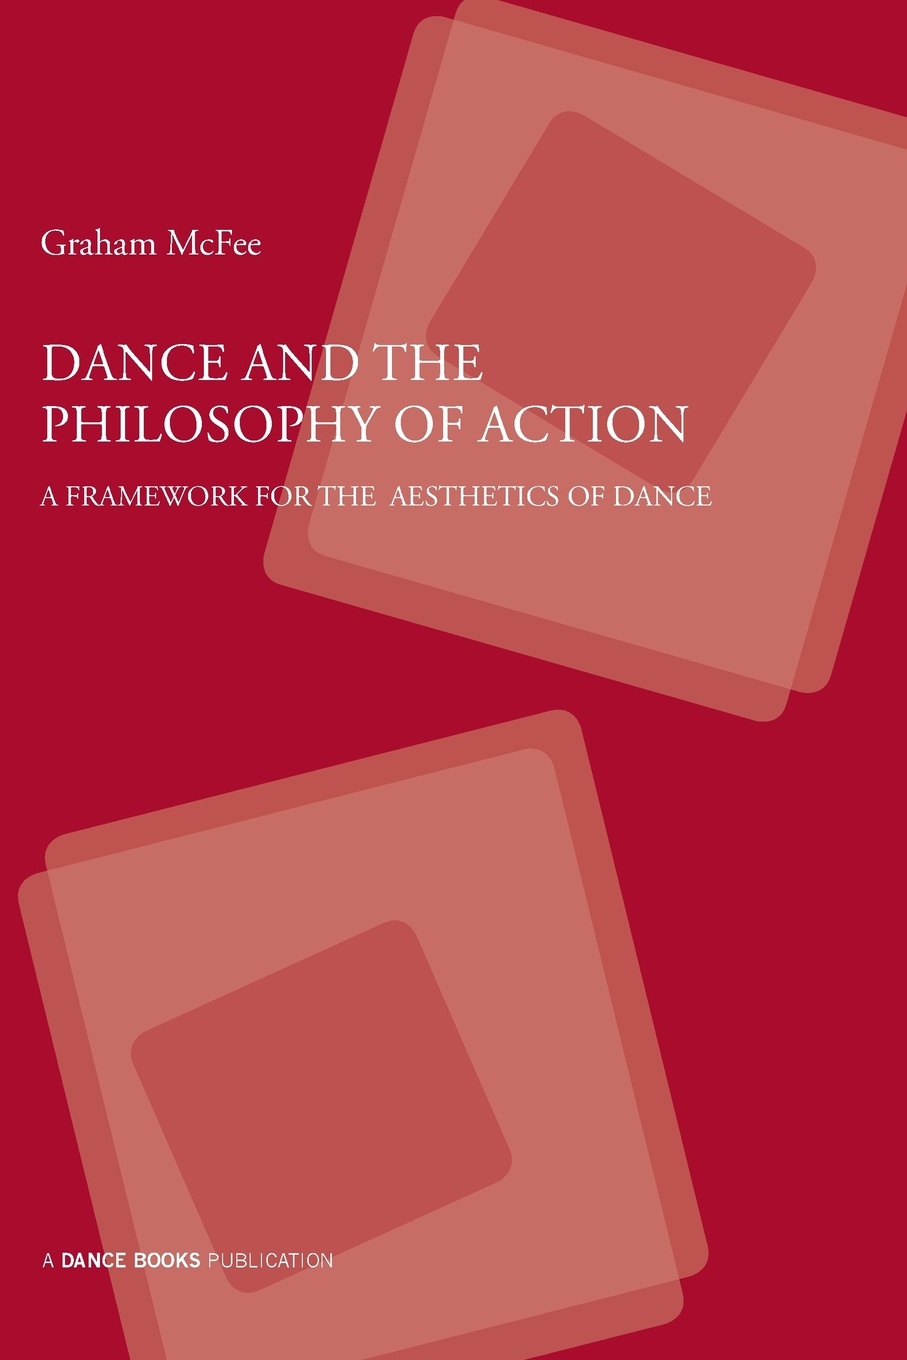 Dance and the Philosophy of Action. A Framework for the Aesthetics of Dance